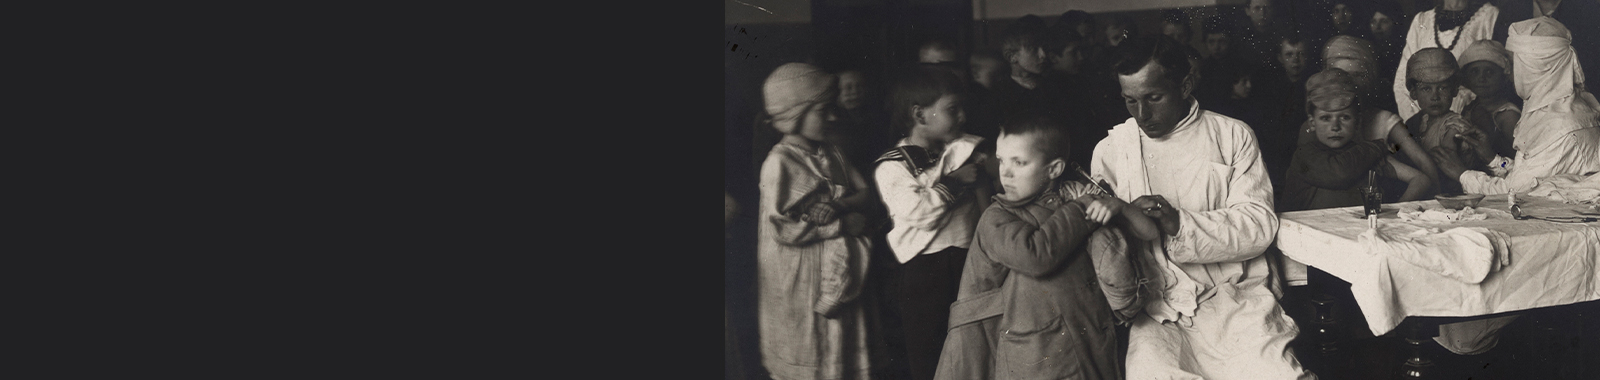 Black and white photograph of ARA staff administering vaccines to children in 1922 Petrograd.